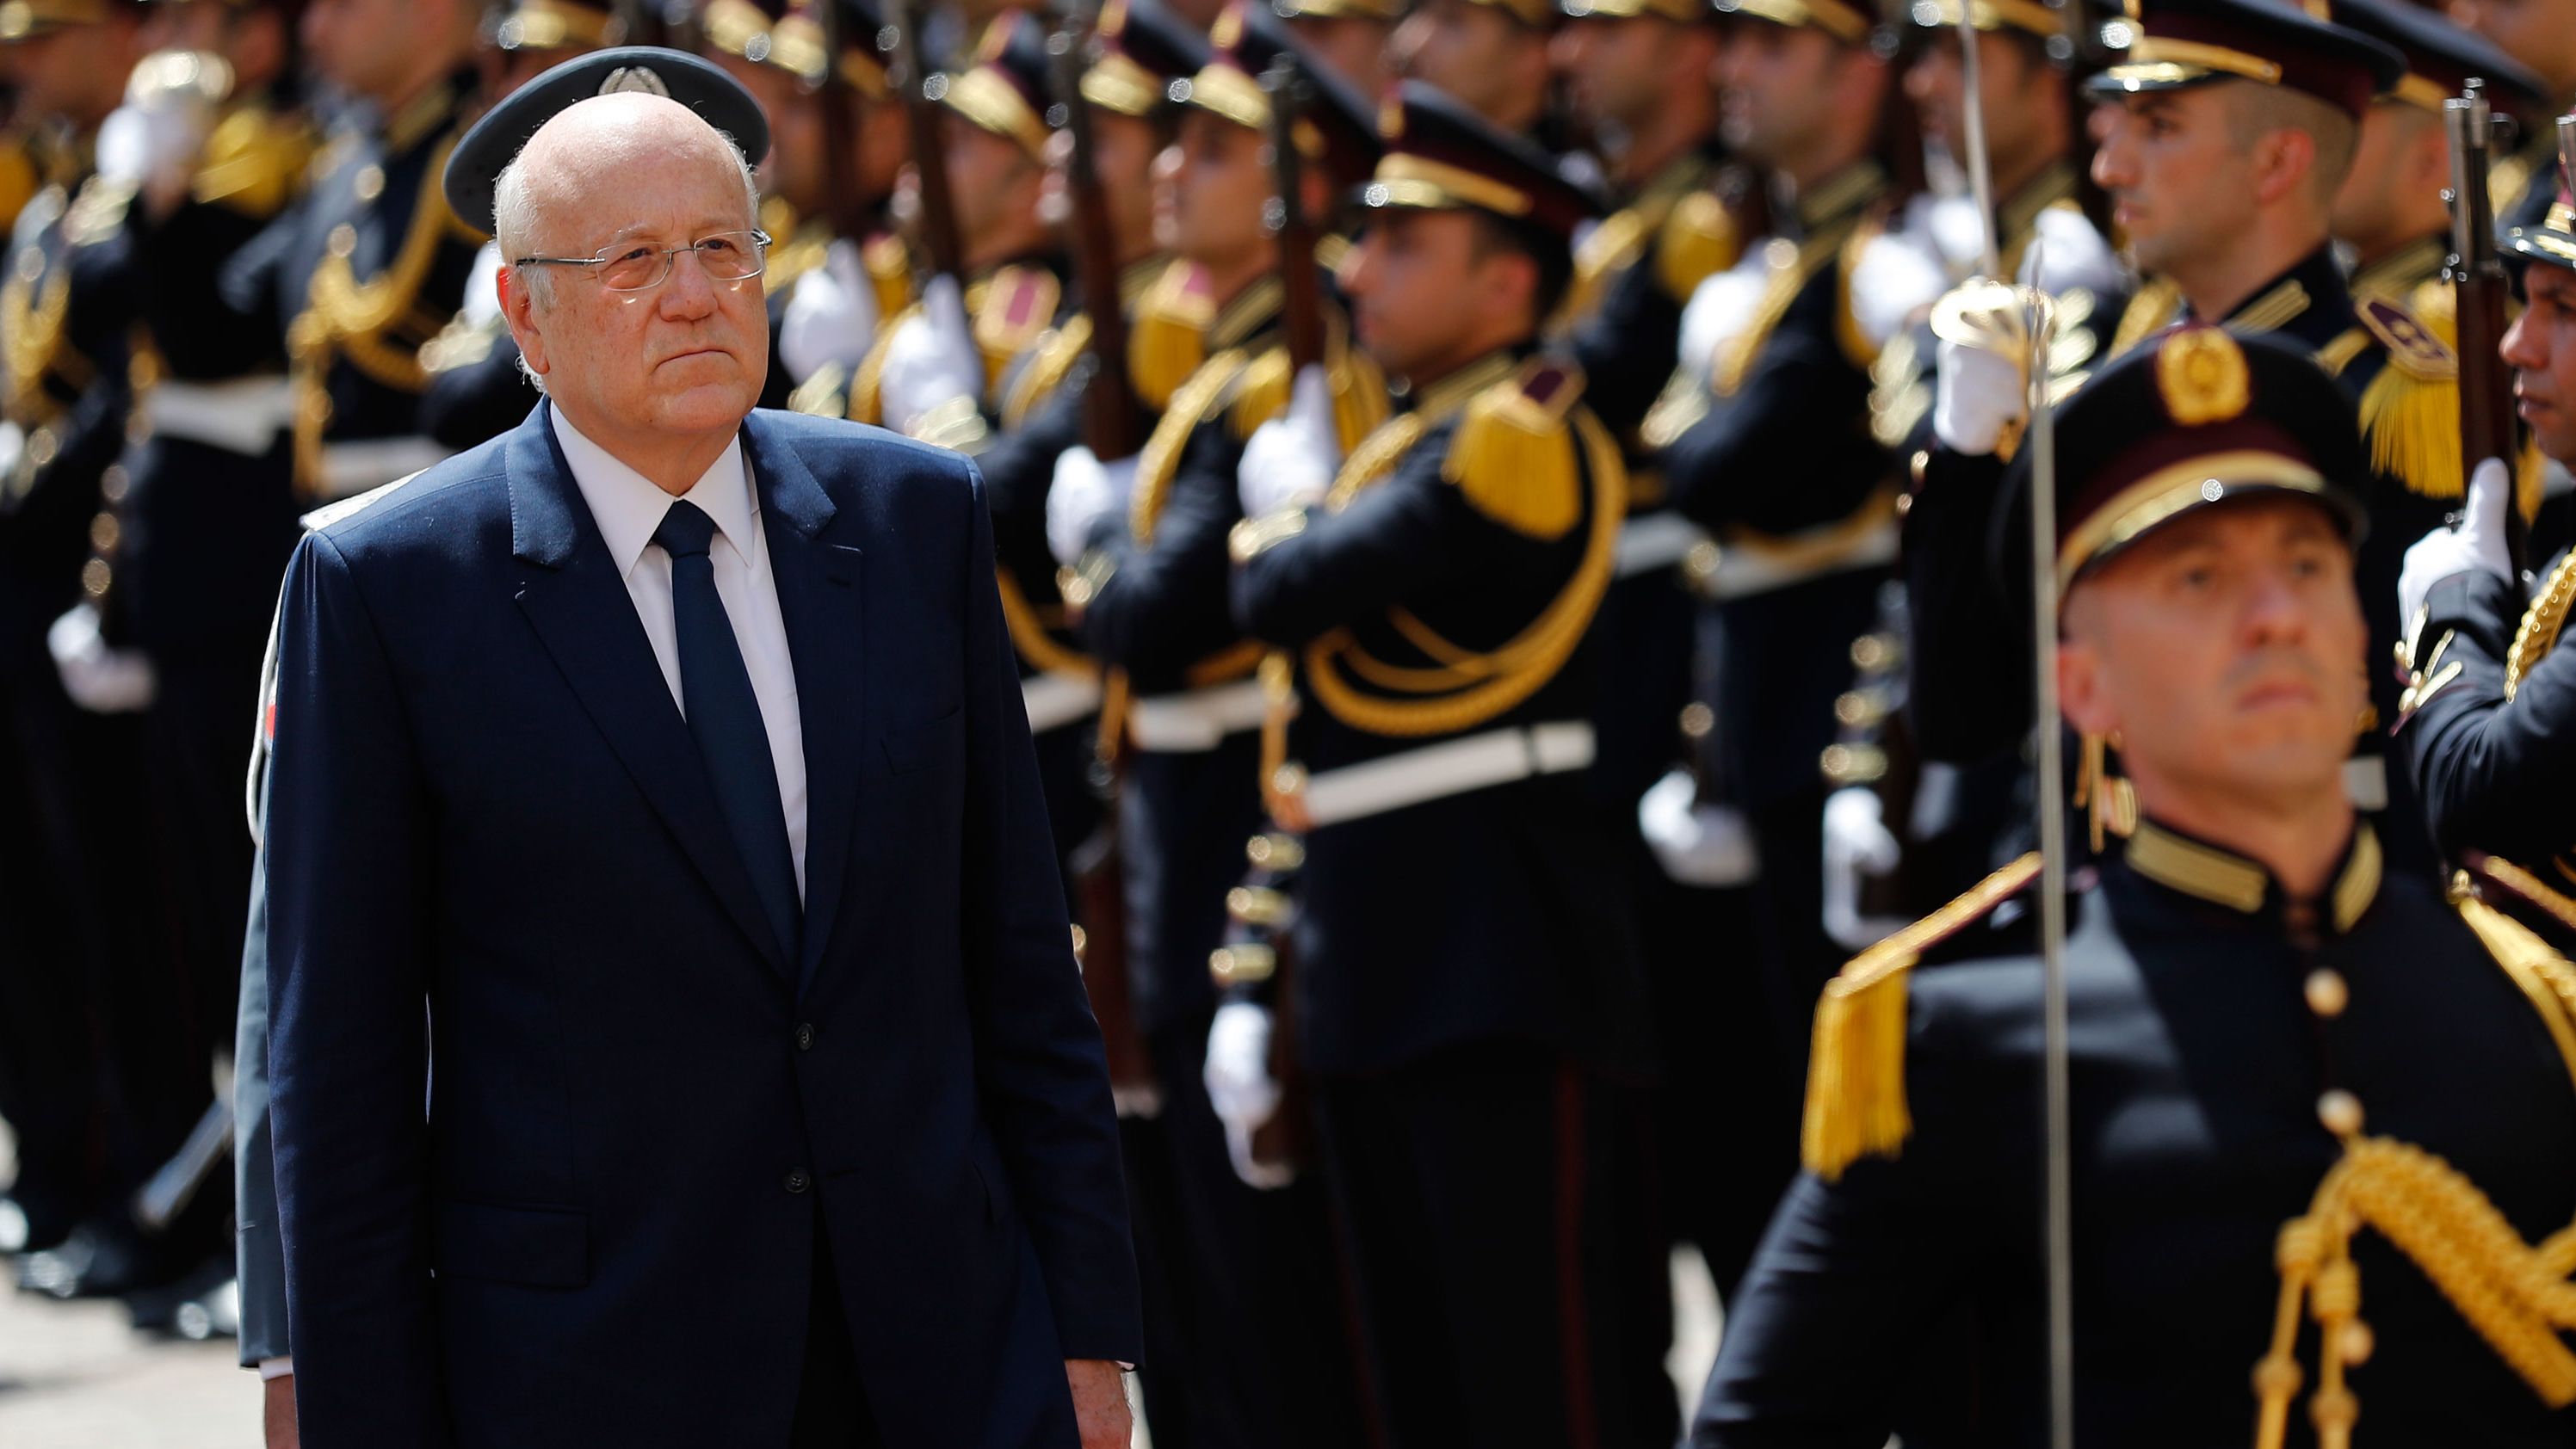 Lebanese Prime Minister Najib Mikati, reviews an honor guard during a ceremony at the Government House in downtown Beirut, Lebanon, on September 13, 2021.